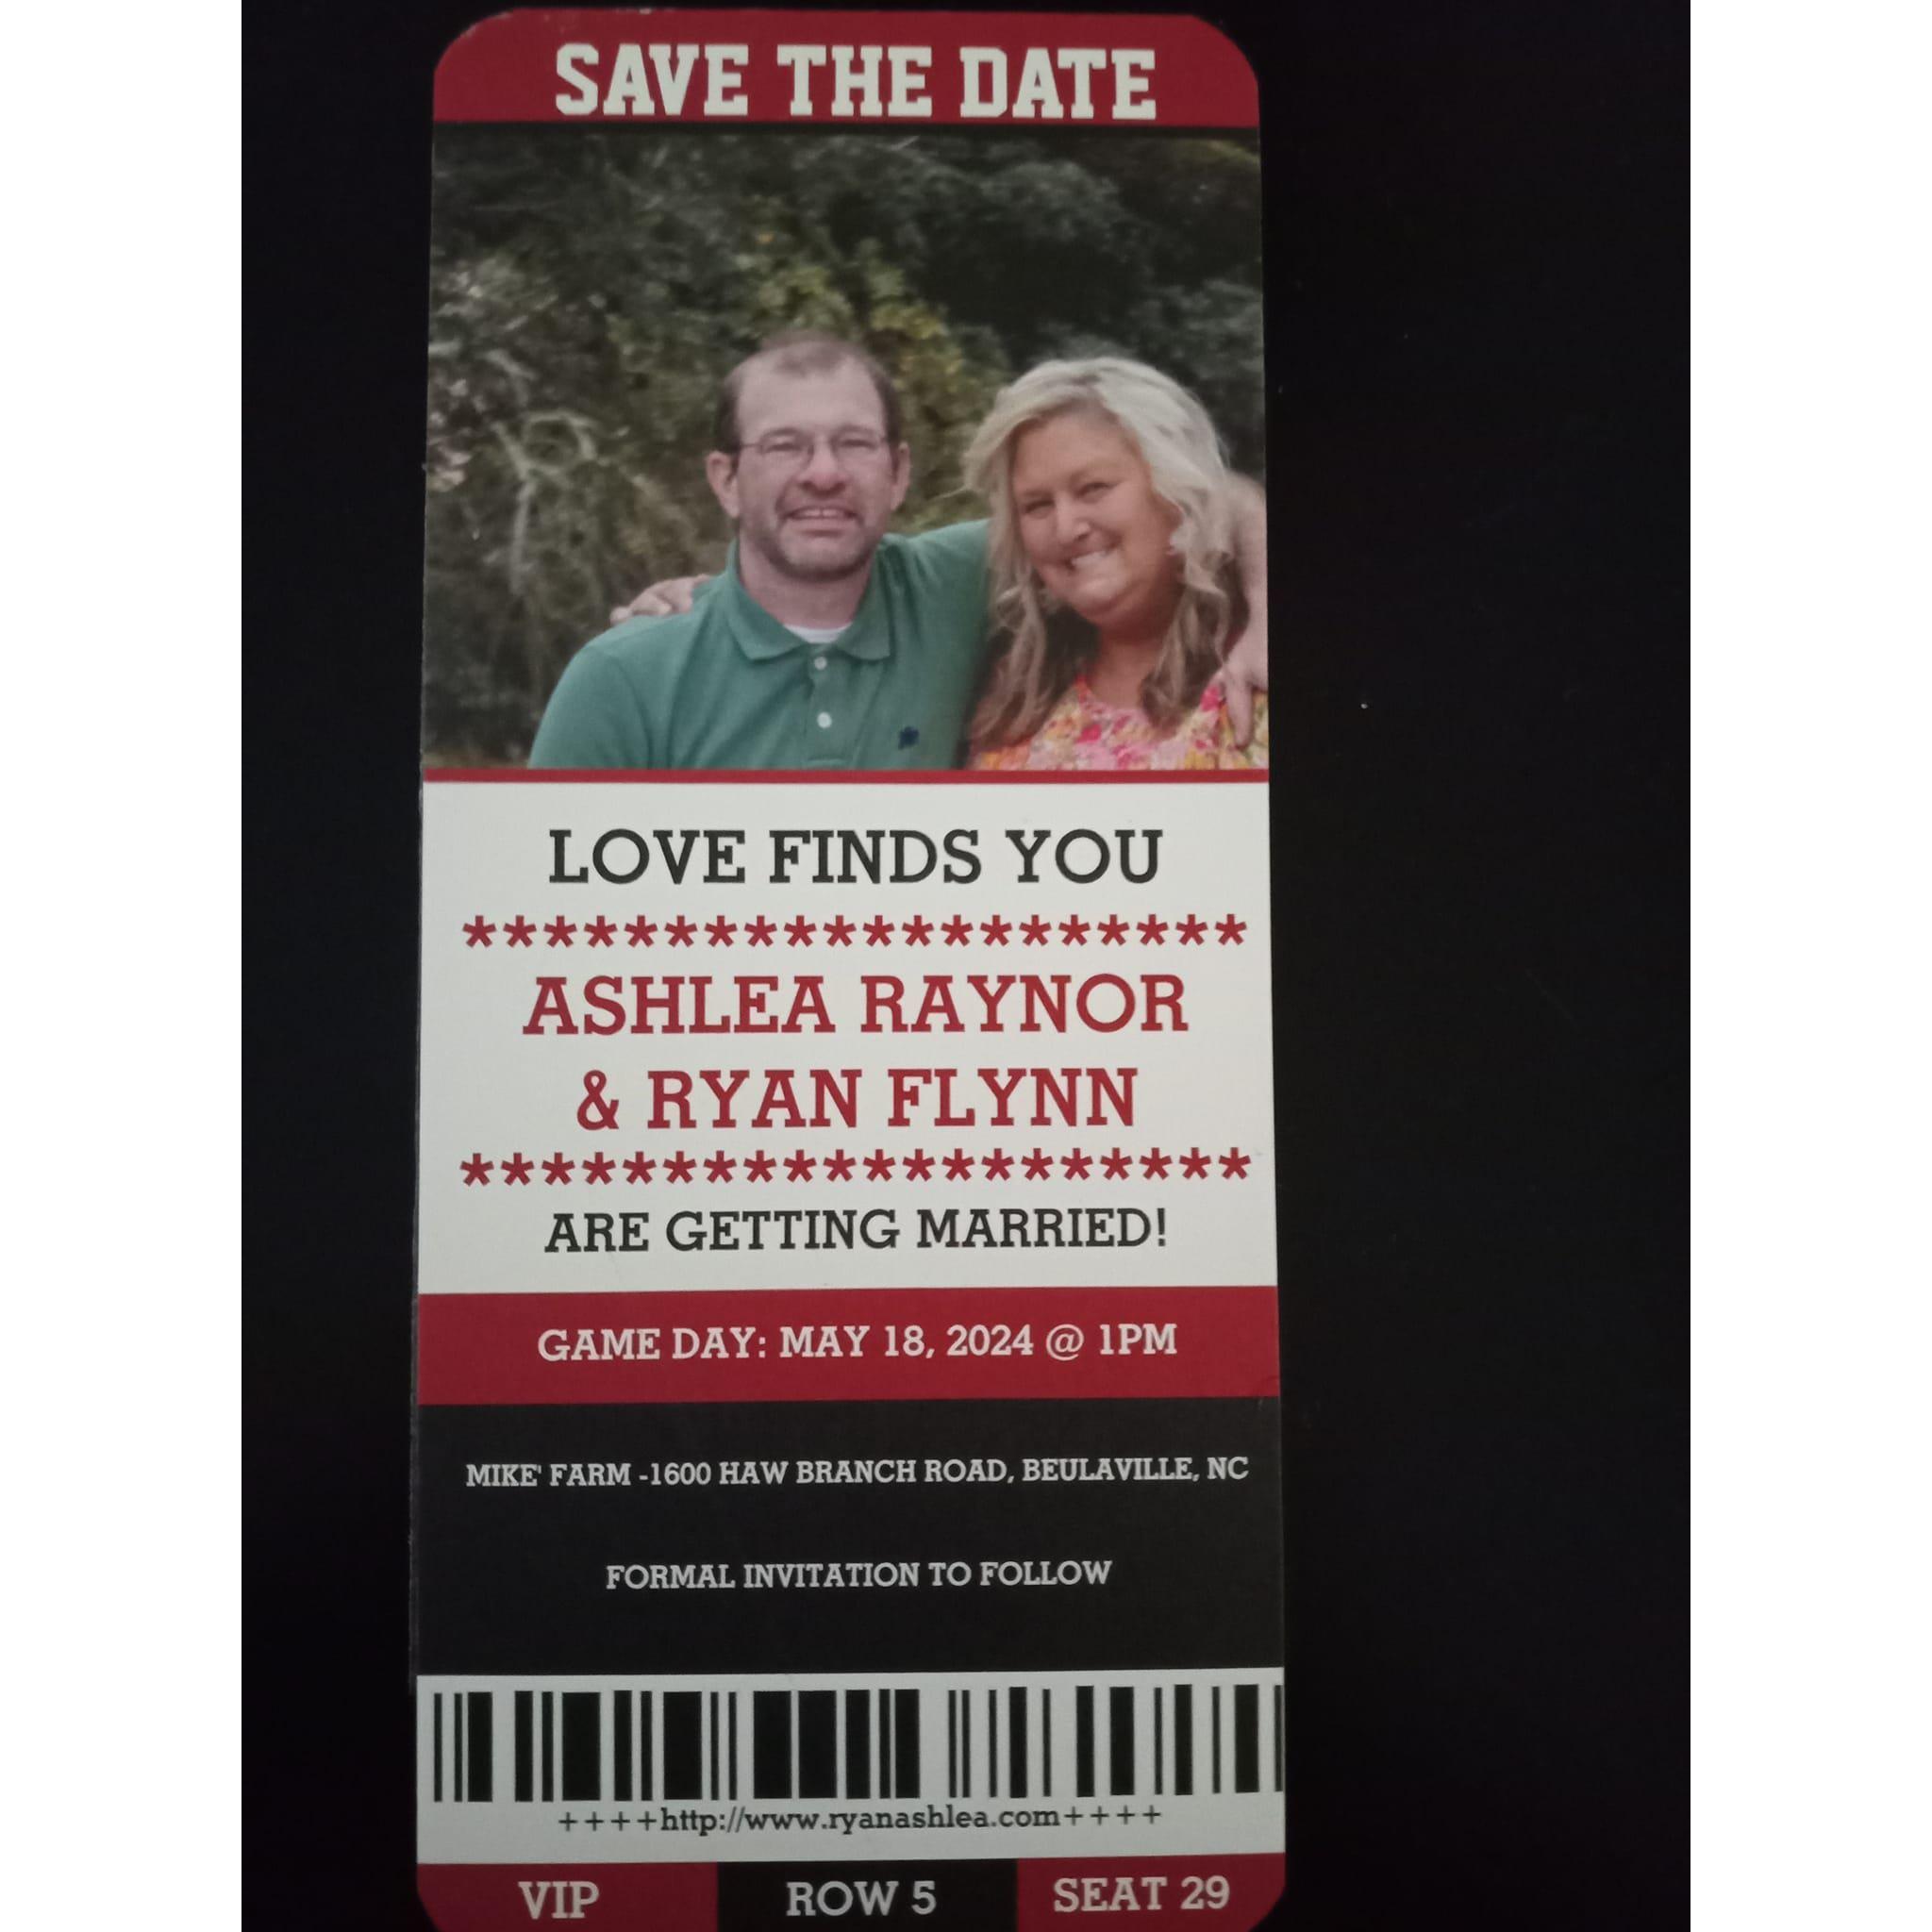 Save the date cards mailed 5/18/2023